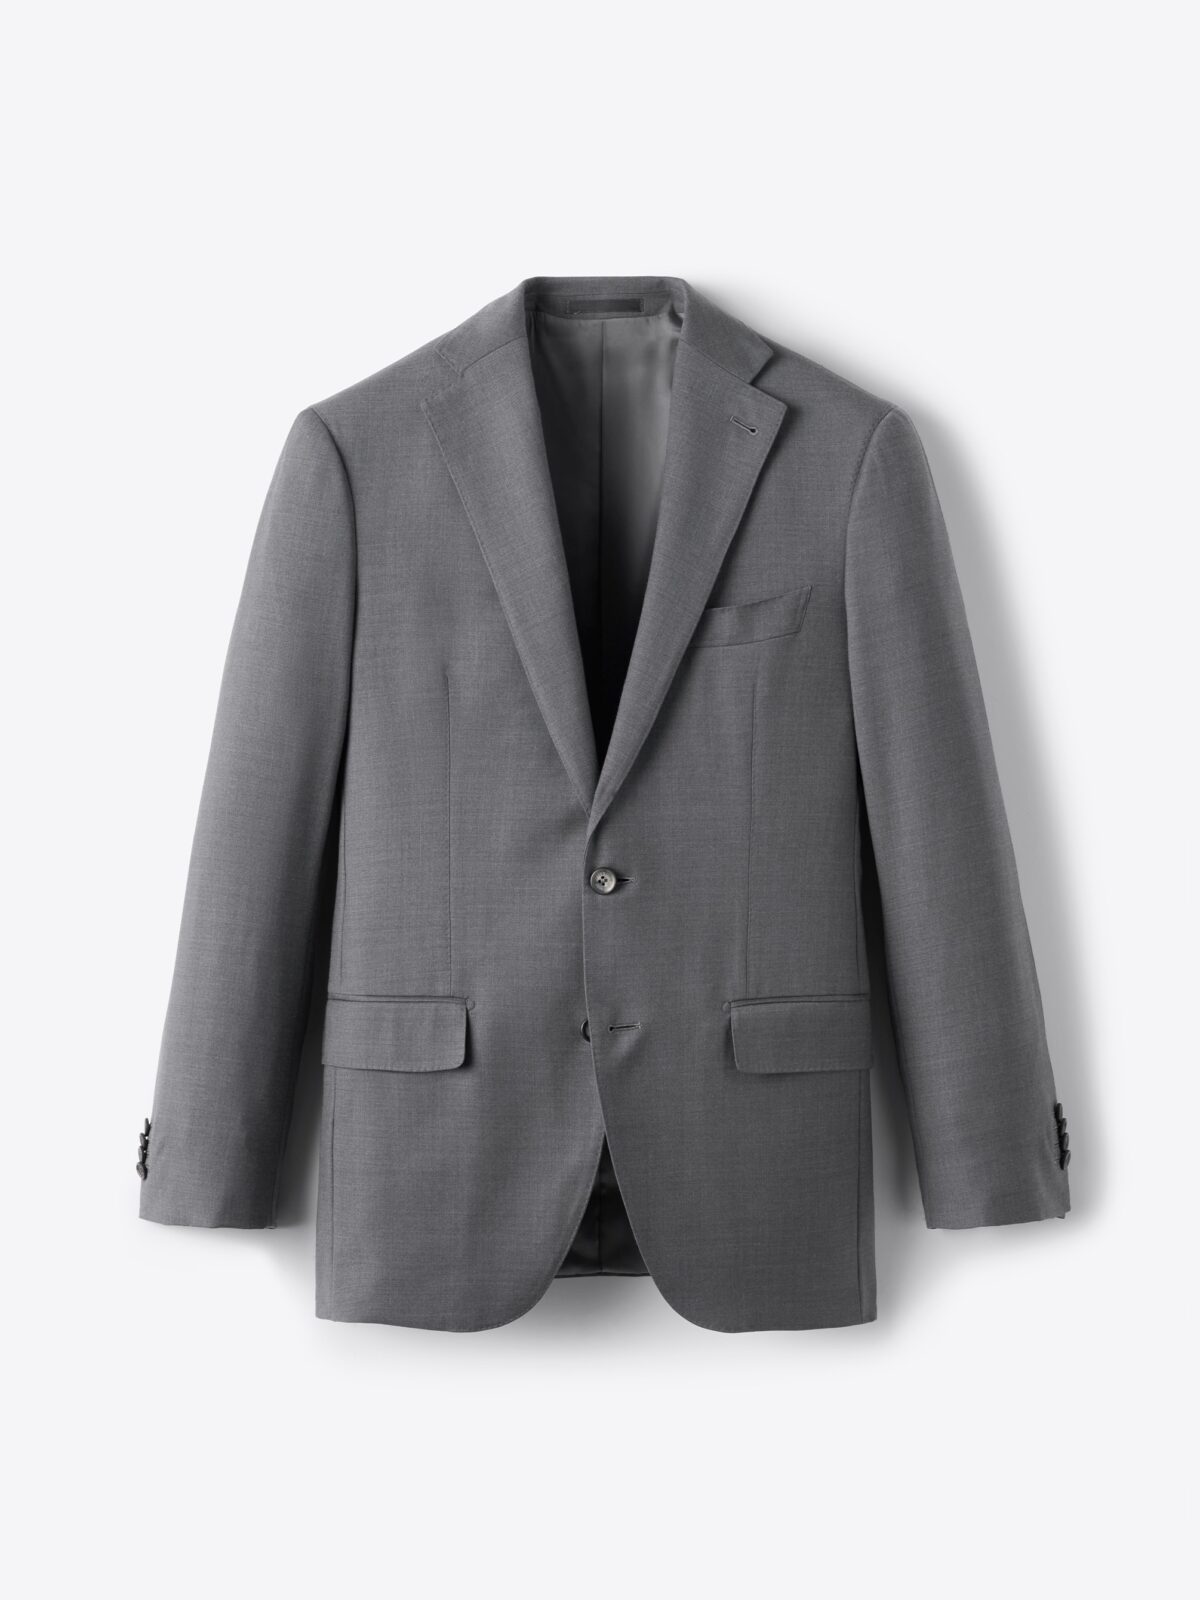 Bespoke Suit Jacket with Patch Pockets